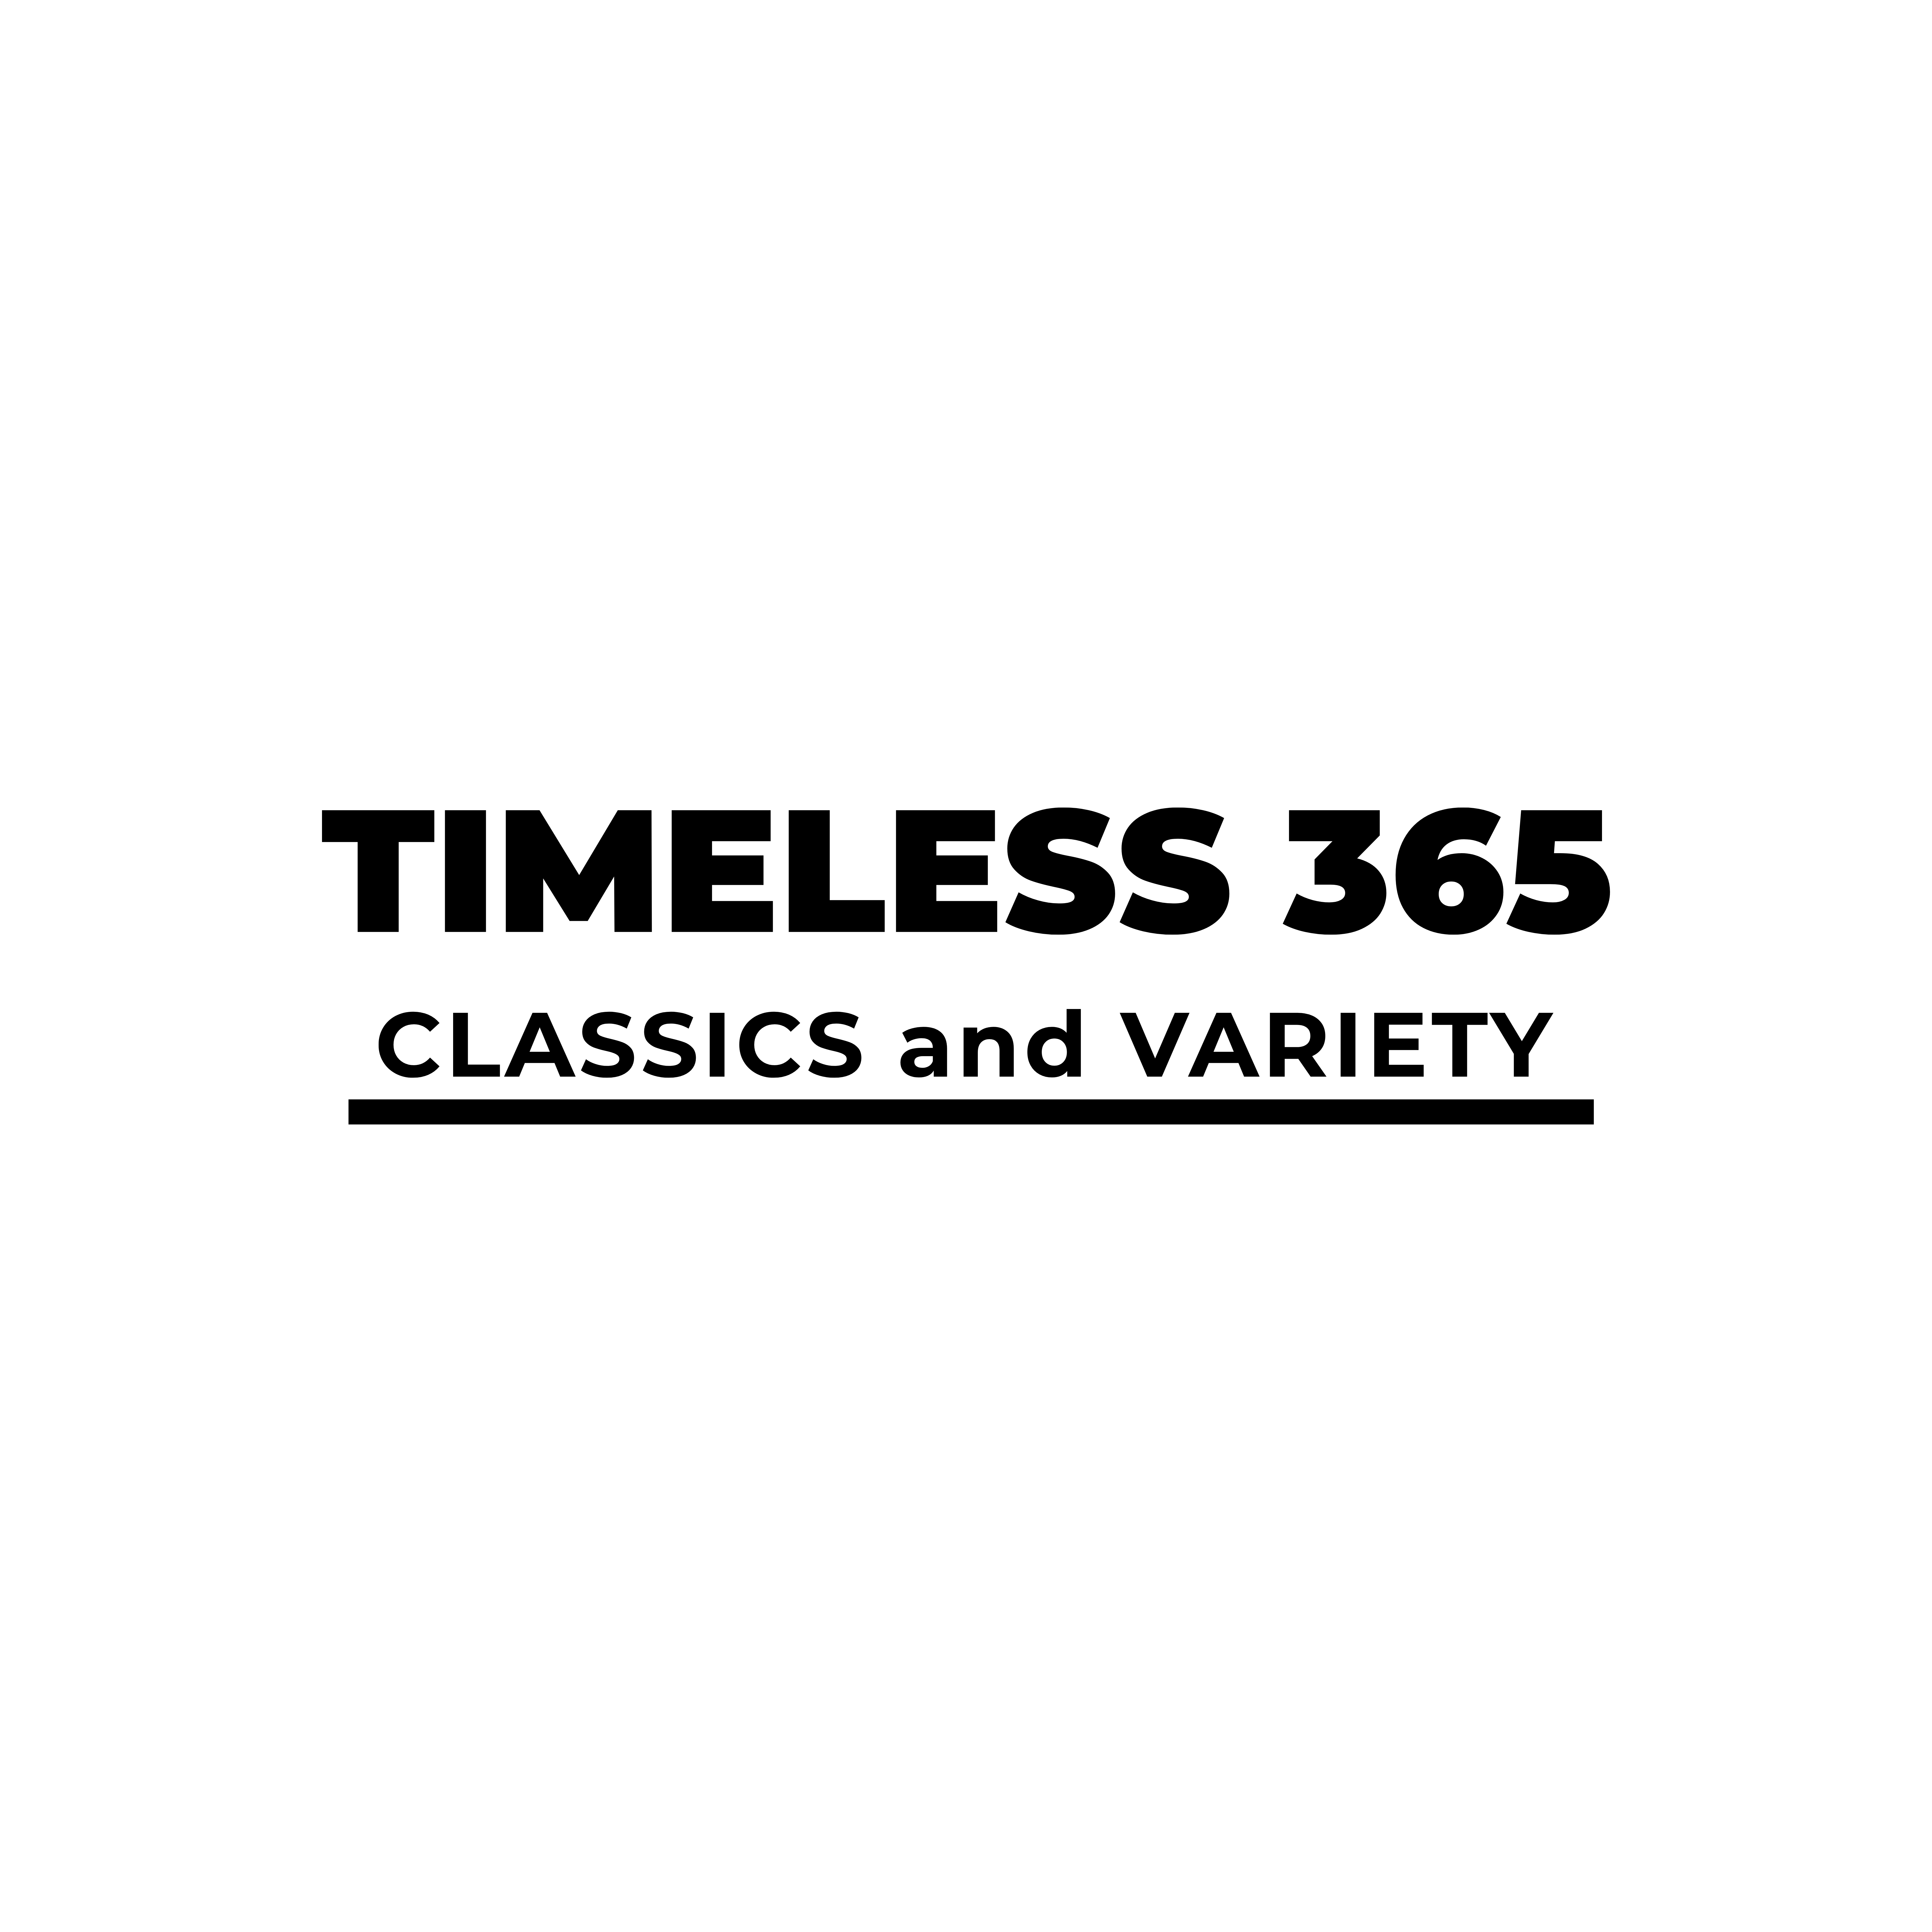 Art for Timeless365 ID by Untitled Artist